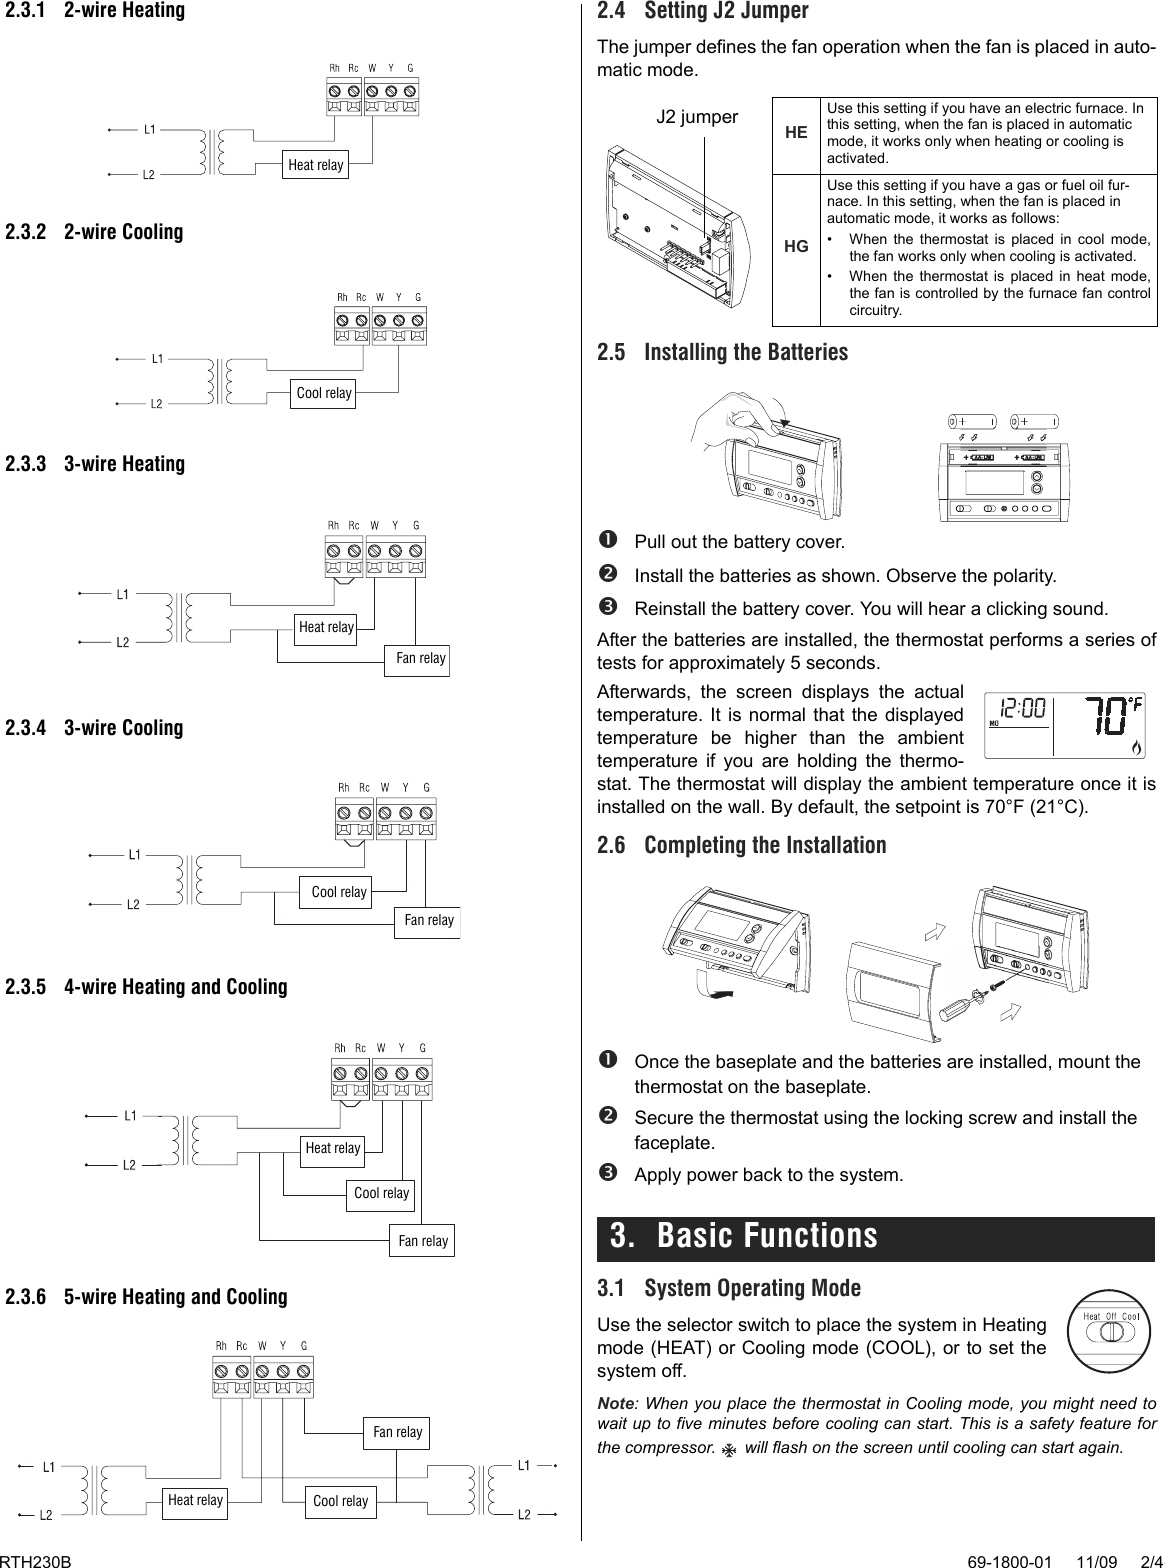 Page 2 of 4 - Honeywell Honeywell-Honeywell-Thermostat-Rth230B-Users-Manual- 69-1800 RTH230B Programmable Electronic Thermostat Installation And User Guide  Honeywell-honeywell-thermostat-rth230b-users-manual